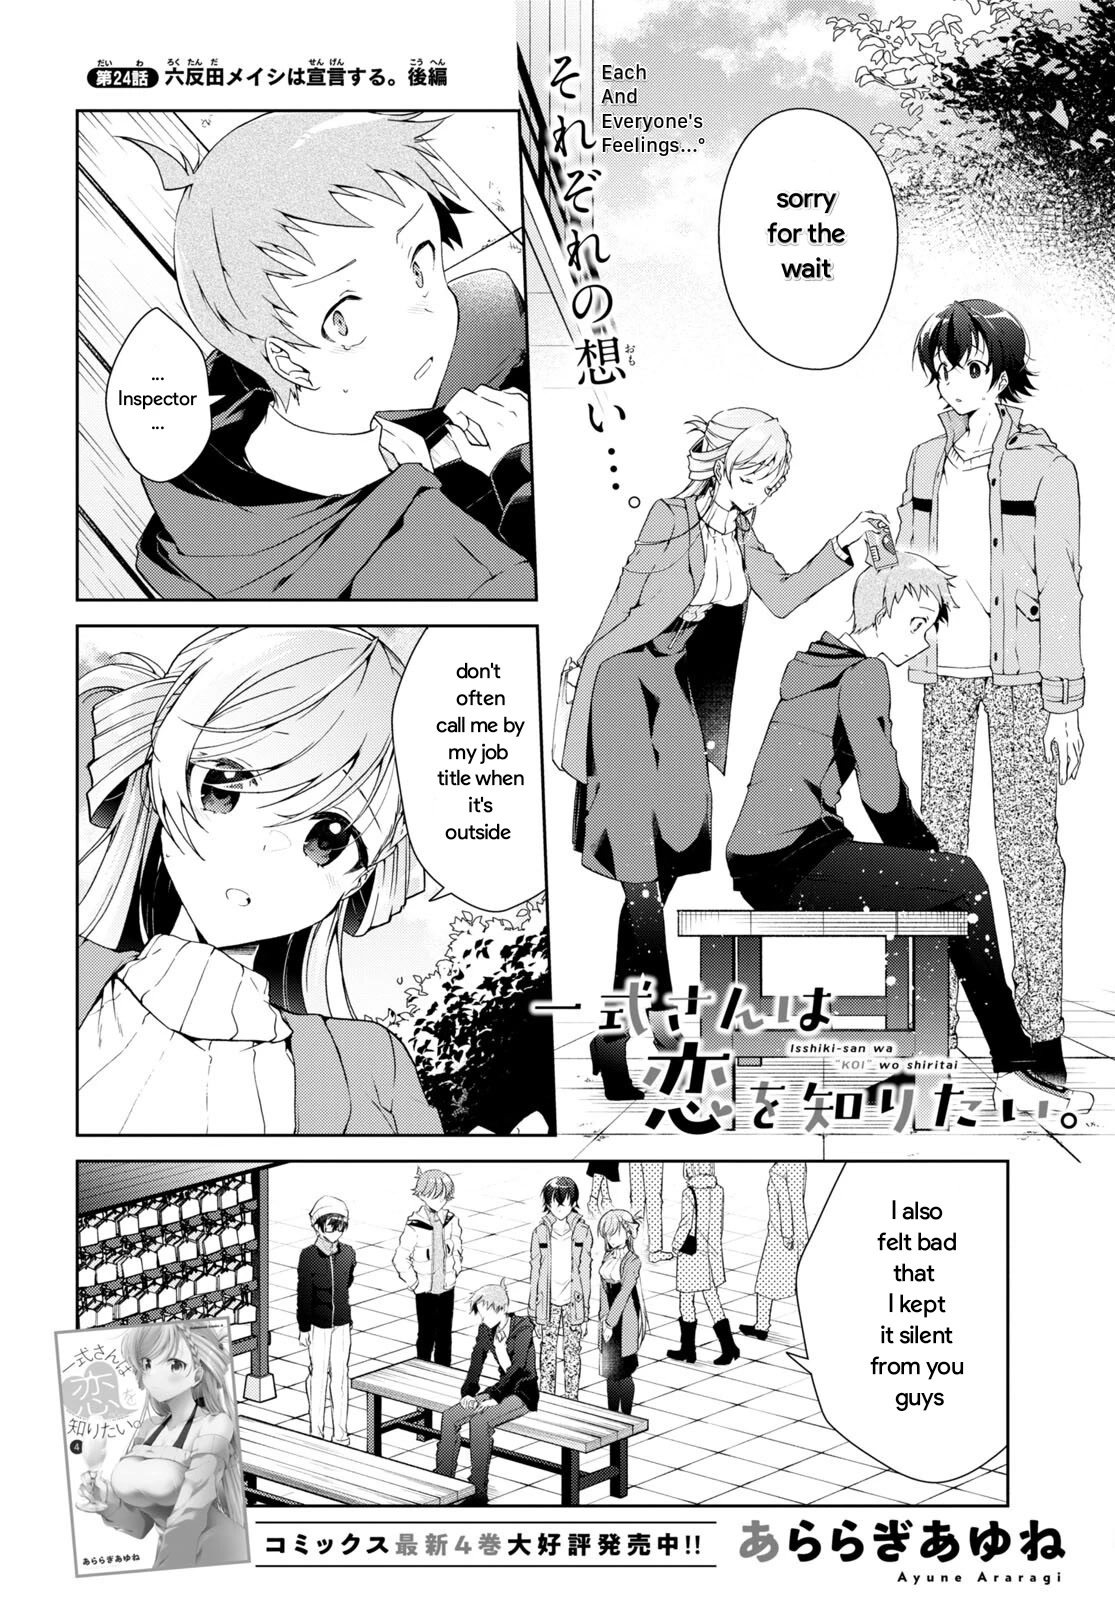 Isshiki-san Wants to Know About Love. - chapter 24.2 - #1